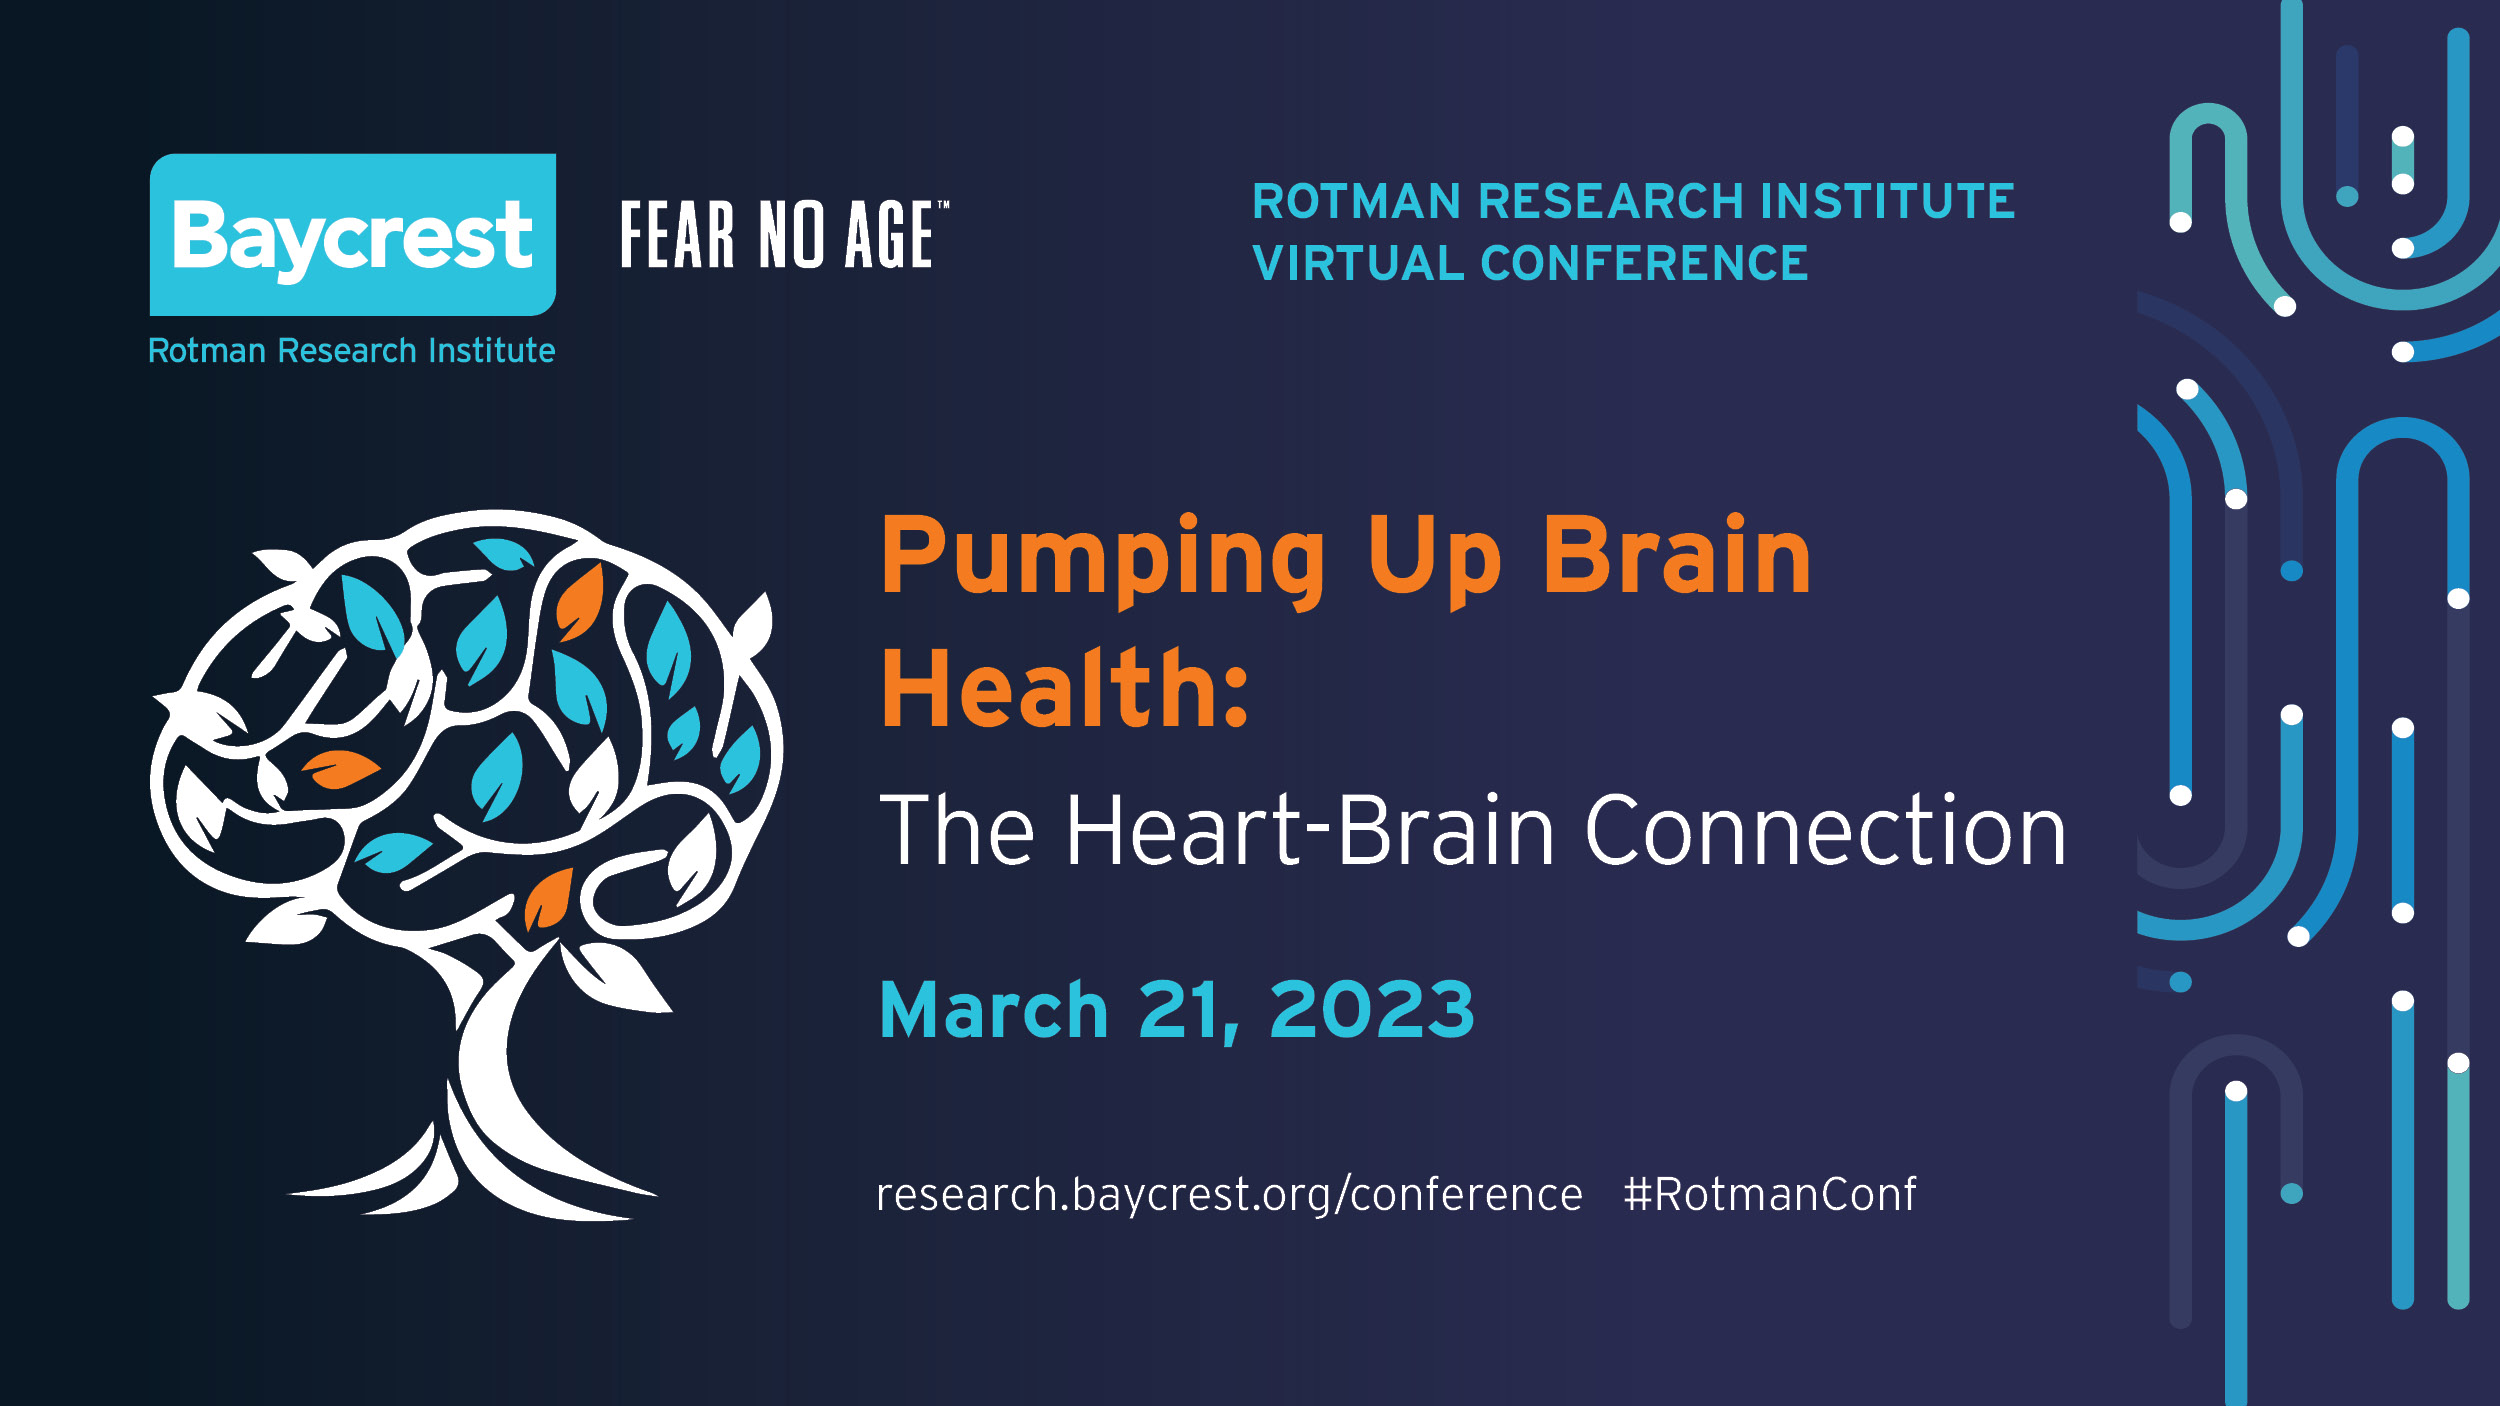 Pumping Up Brain Health: The Heart-Brain Connection